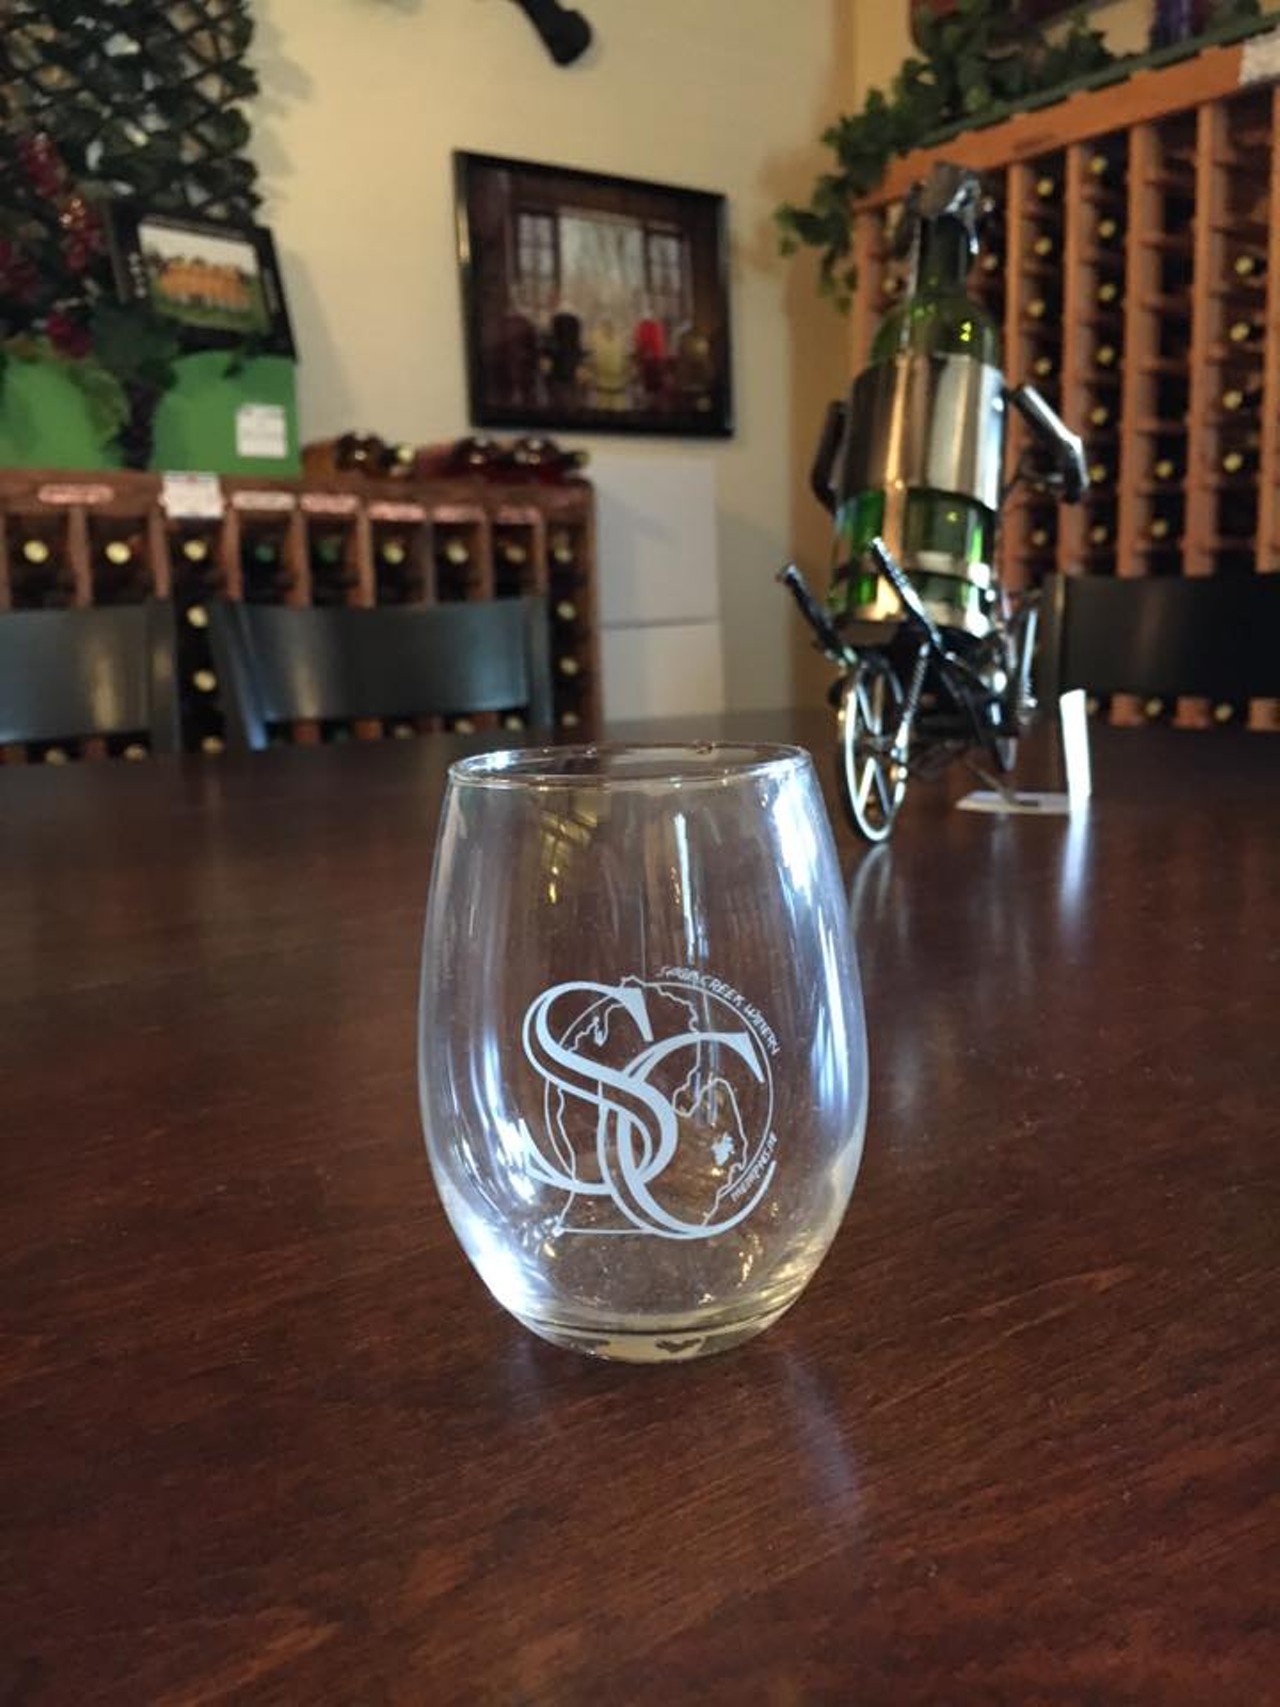 Sage Creek Winery, Memphis
This welcoming winery features classic varieties and original blends, served with small town hospitality in their cozy Memphis tasting room. Part of the Thumbs Up Wine Trail. (Photo Credit: Sage Creek Winery via Facebook)